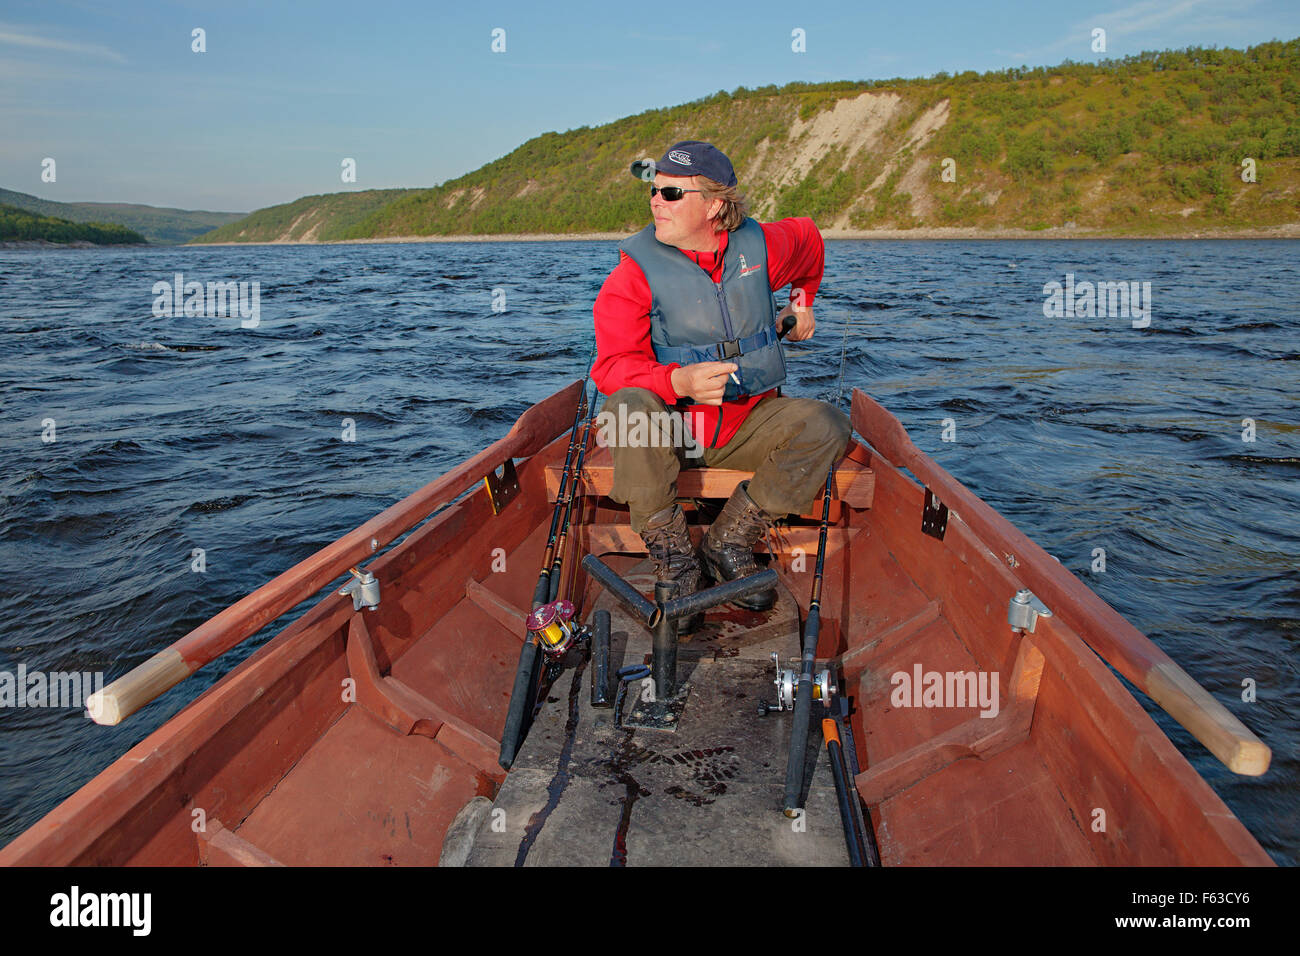 Salmon fishing guide driving his traditional handmade boat at Teno (Tana) River, on the border of Finland and Norway. Stock Photo